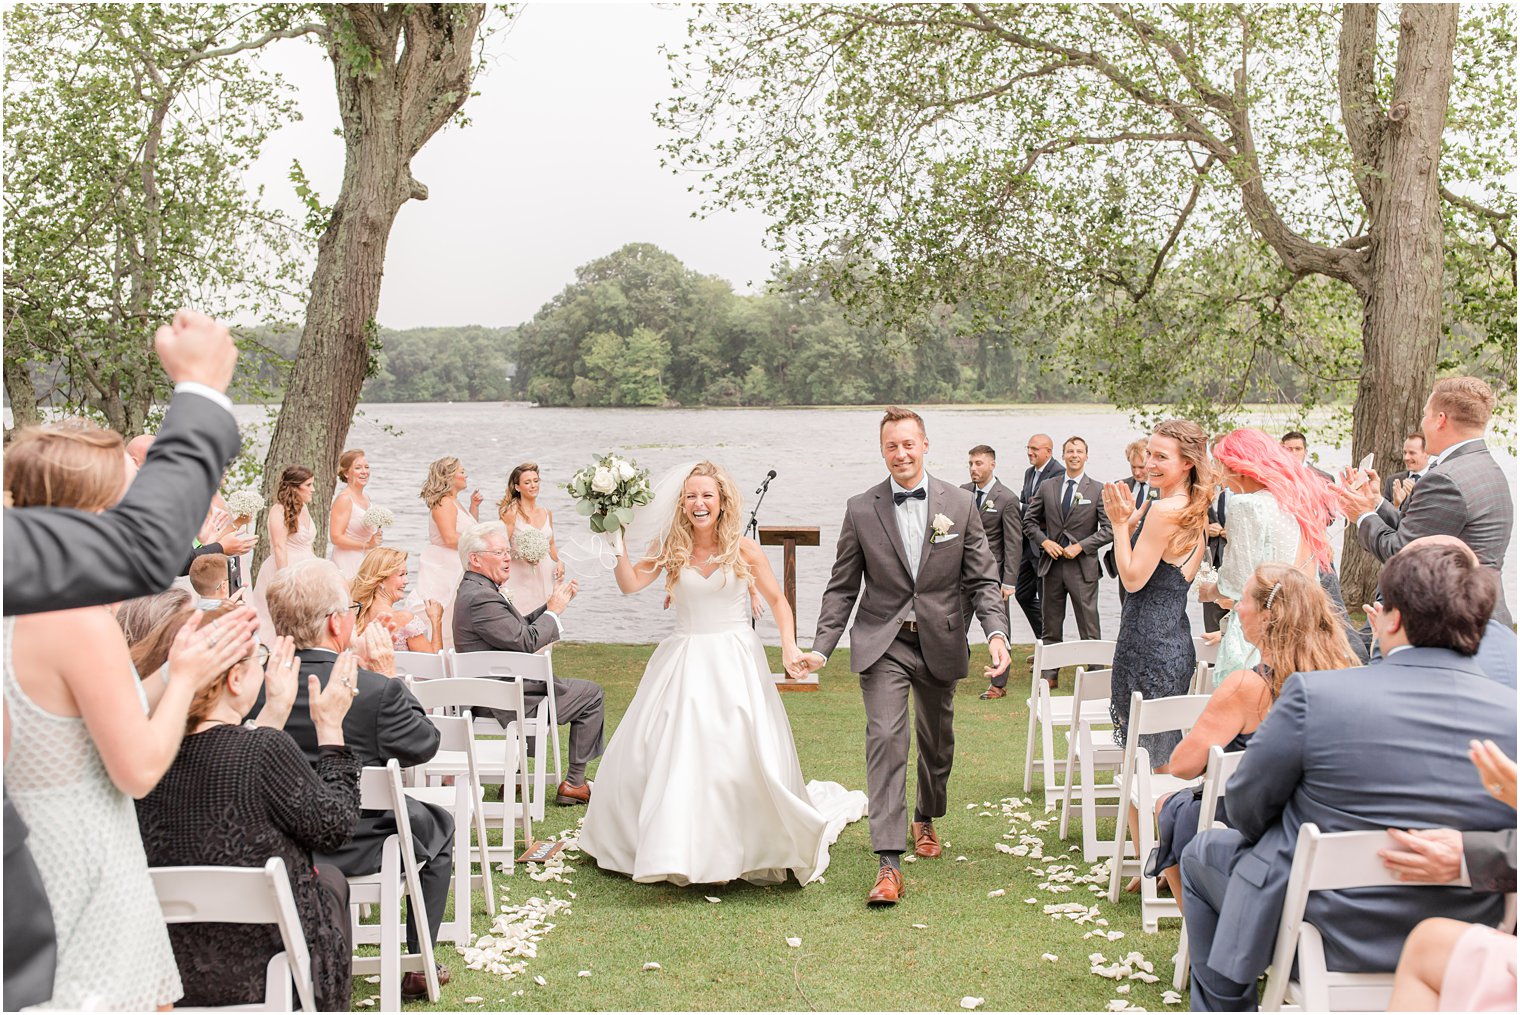 newlyweds walk up aisle after outdoor wedding ceremony in Franklin Lakes